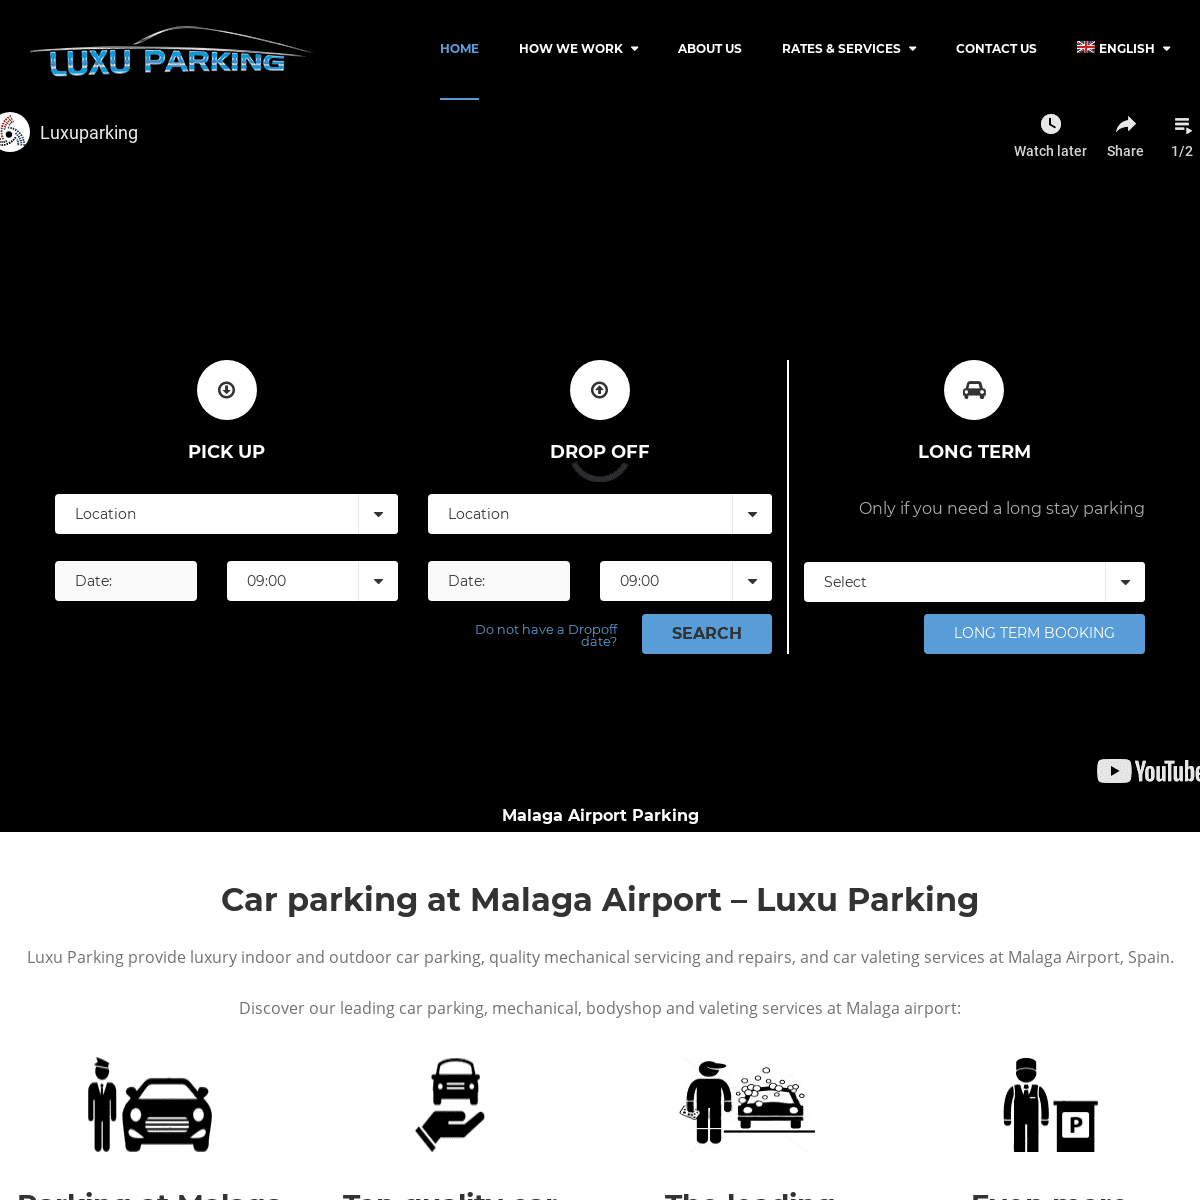 A complete backup of luxuparking.com